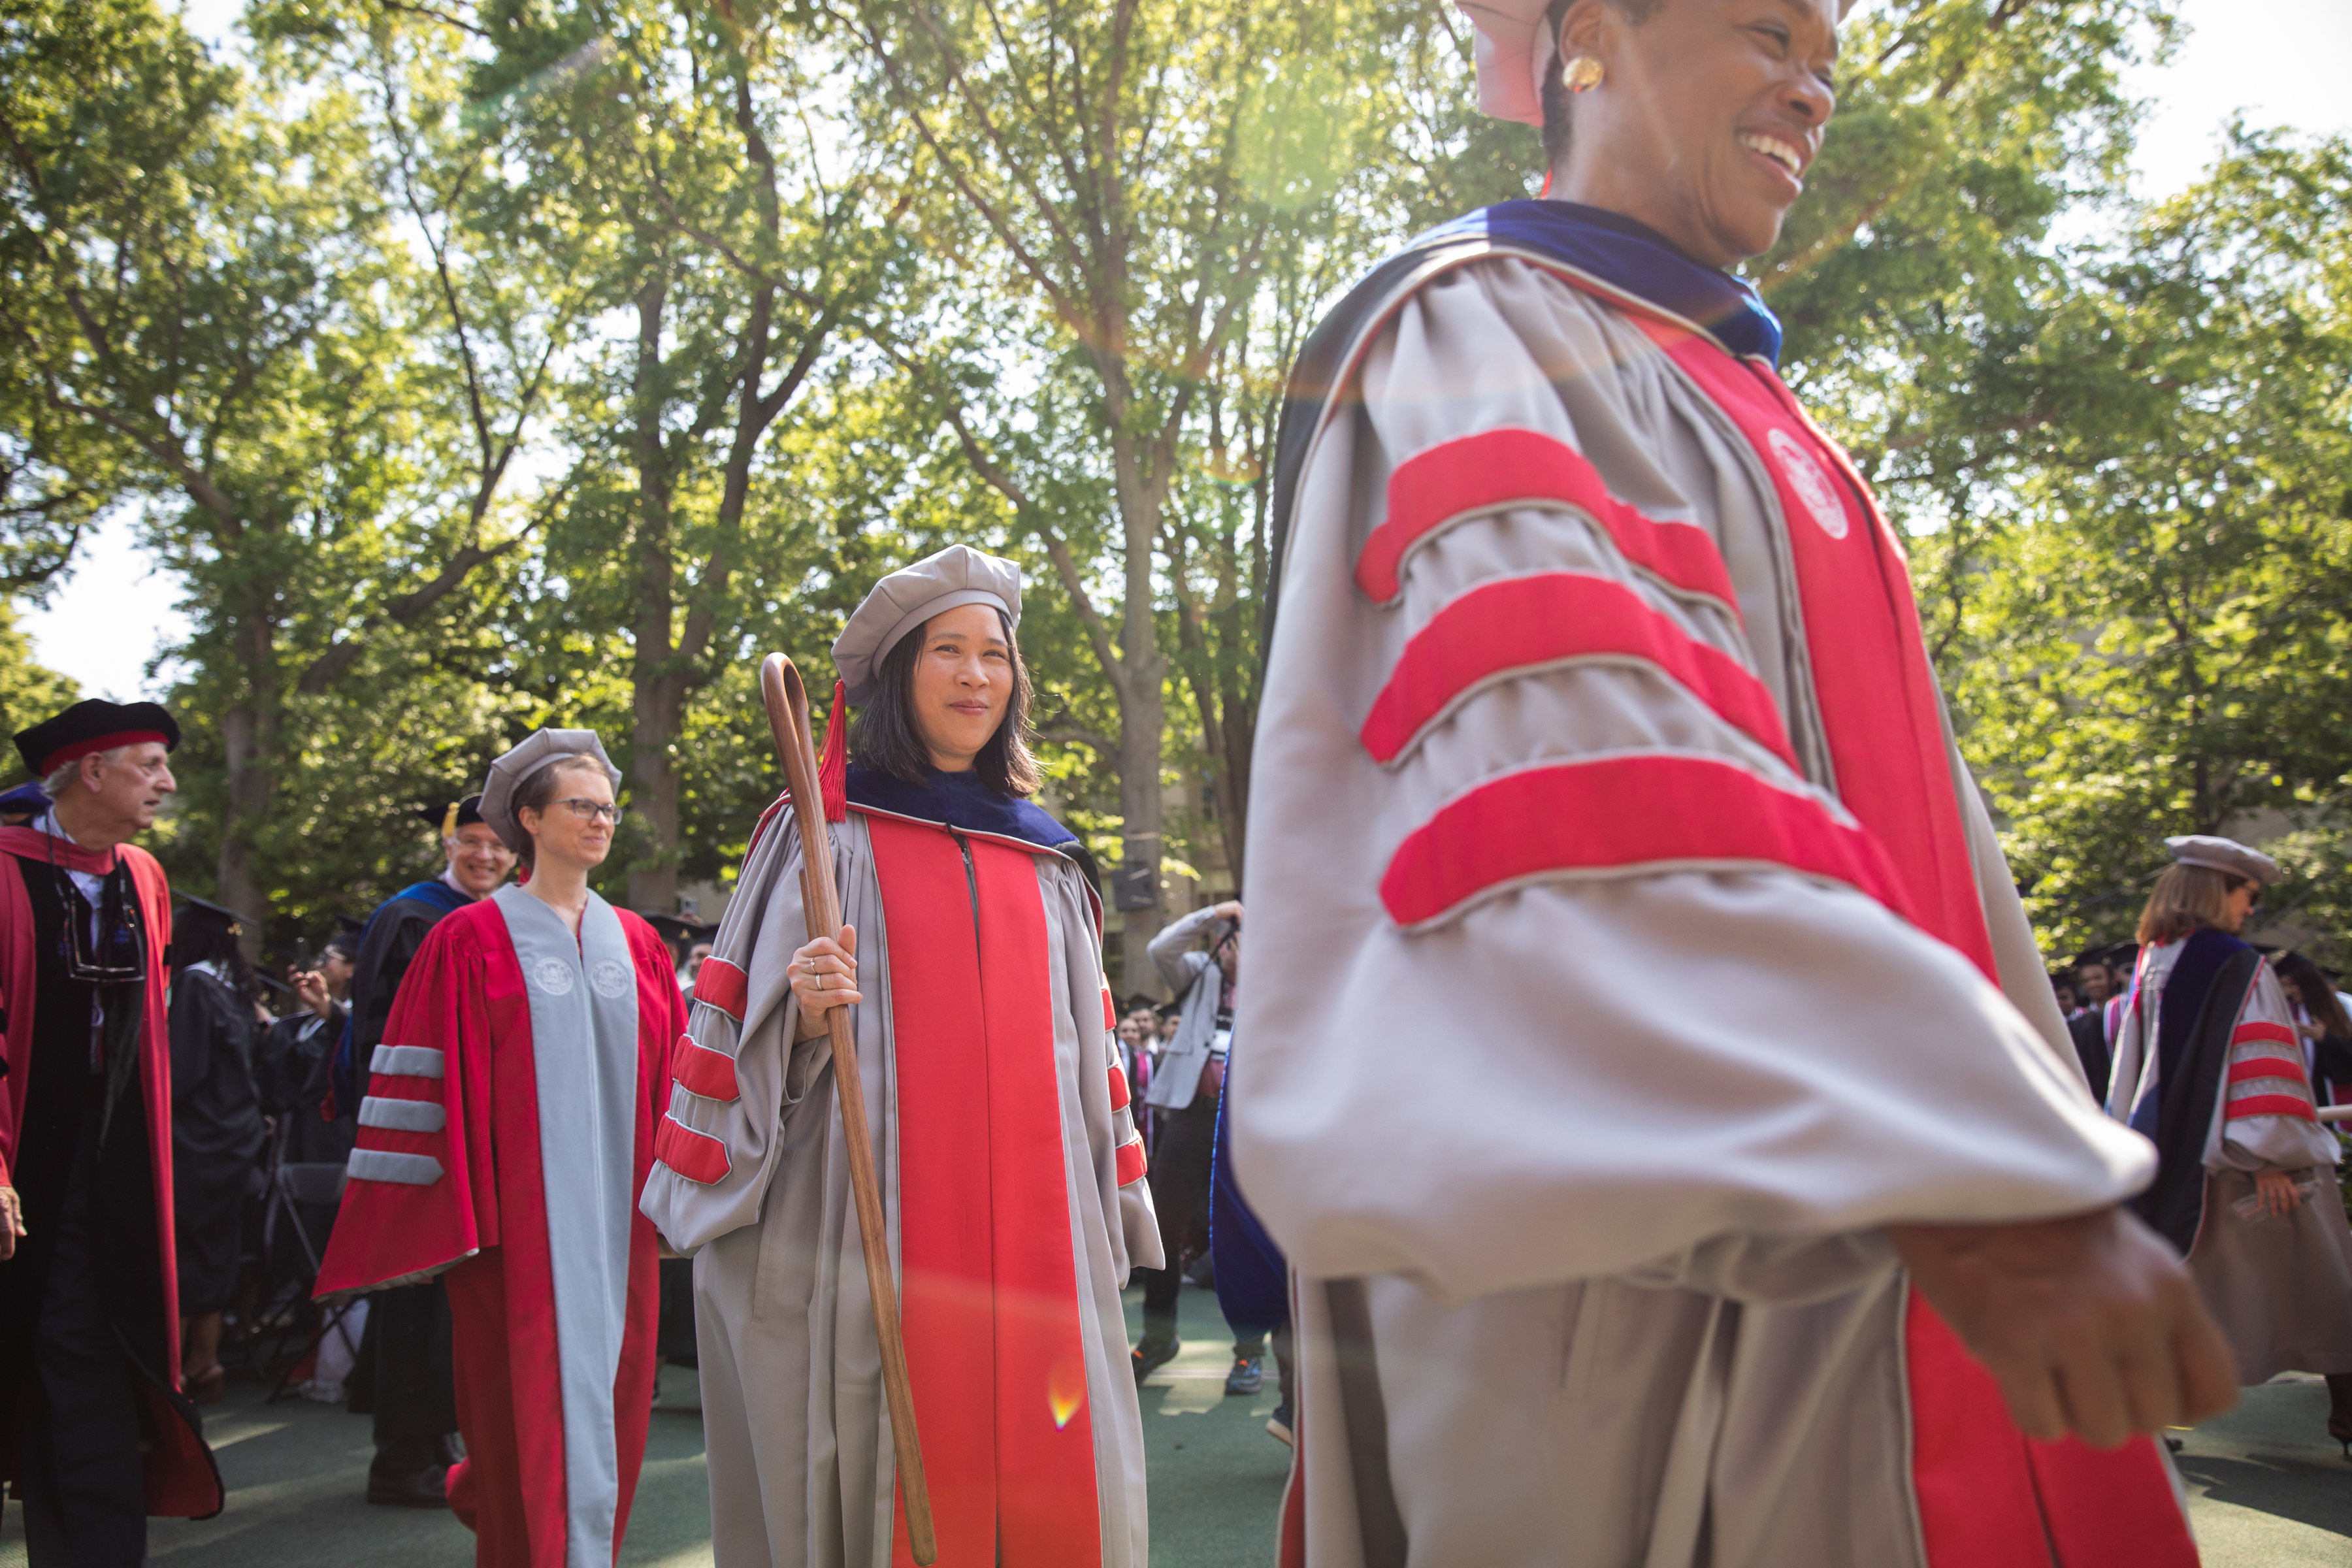 Professor Lily Tsai, then chair of the MIT faculty, held a new ceremonial shepherd’s staff while processing through Killian Court for the OneMIT Ceremony on June 1, 2023. Chaplain to the Institute Thea Keith-Lucas walked behind her while Chancellor Melissa Nobles walked in front of her.